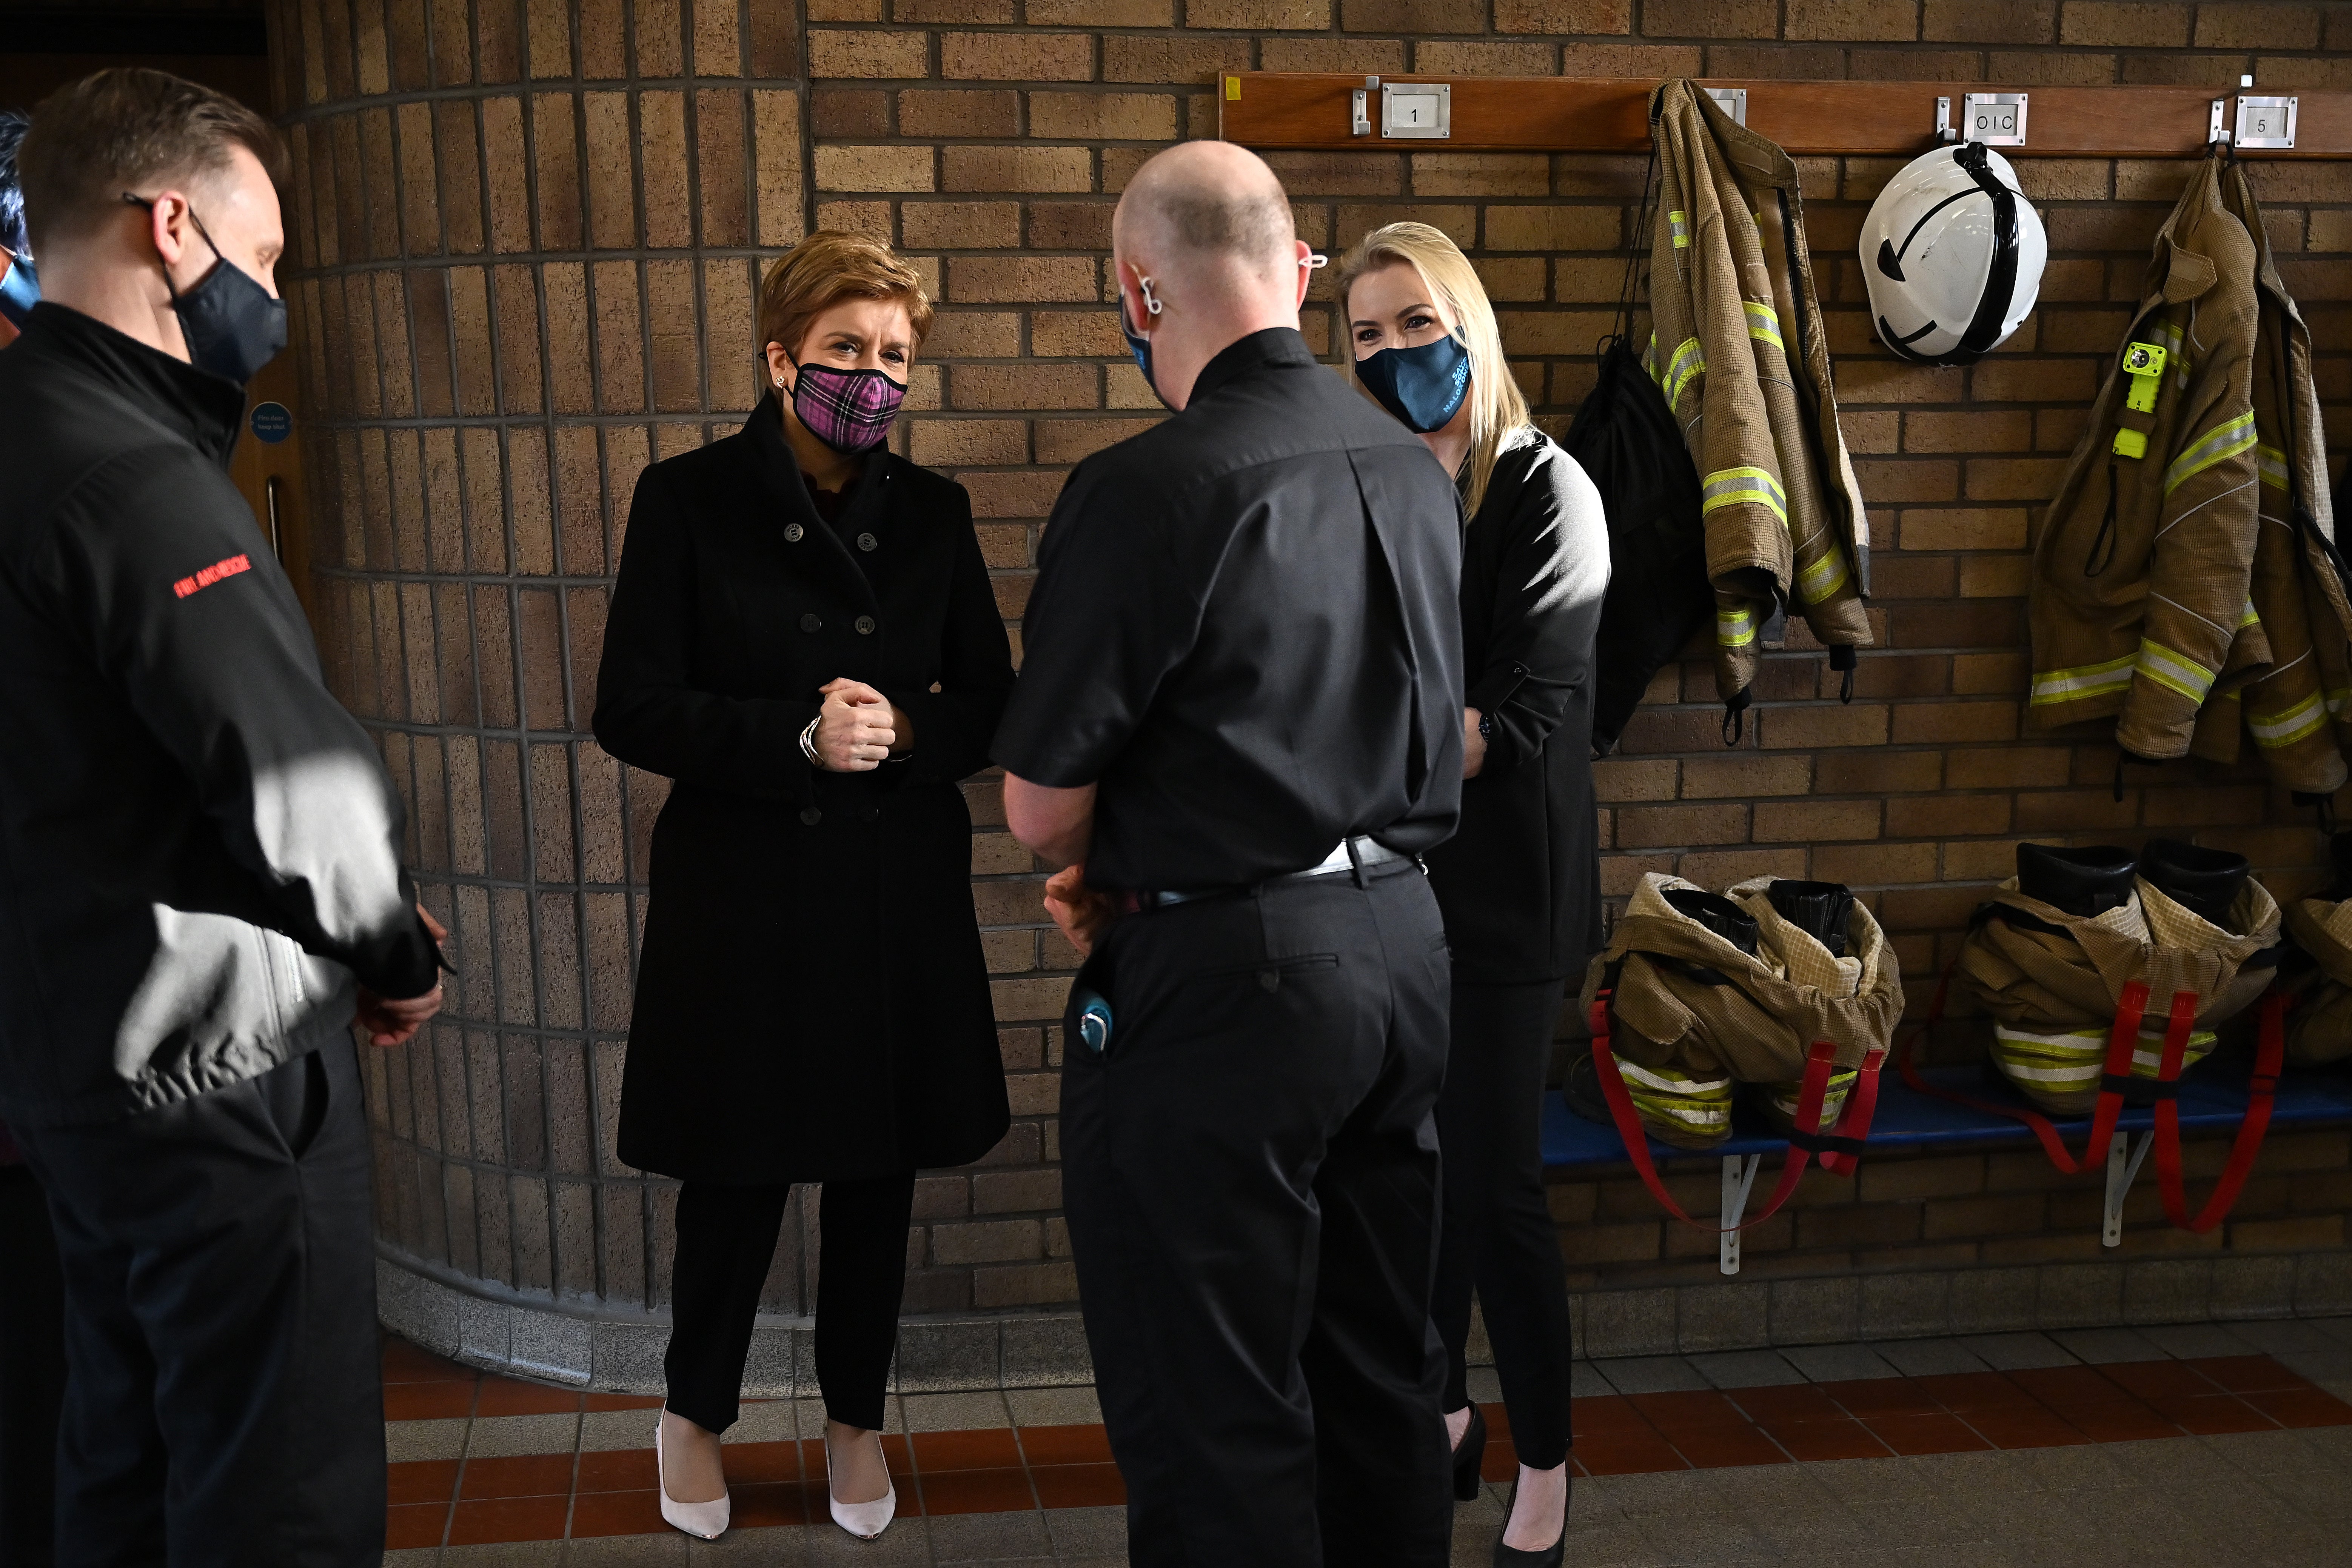 First Minister Nicola Sturgeon spoke to crew during a visit to Bathgate fire station. (Jeff J Mitchell/PA)